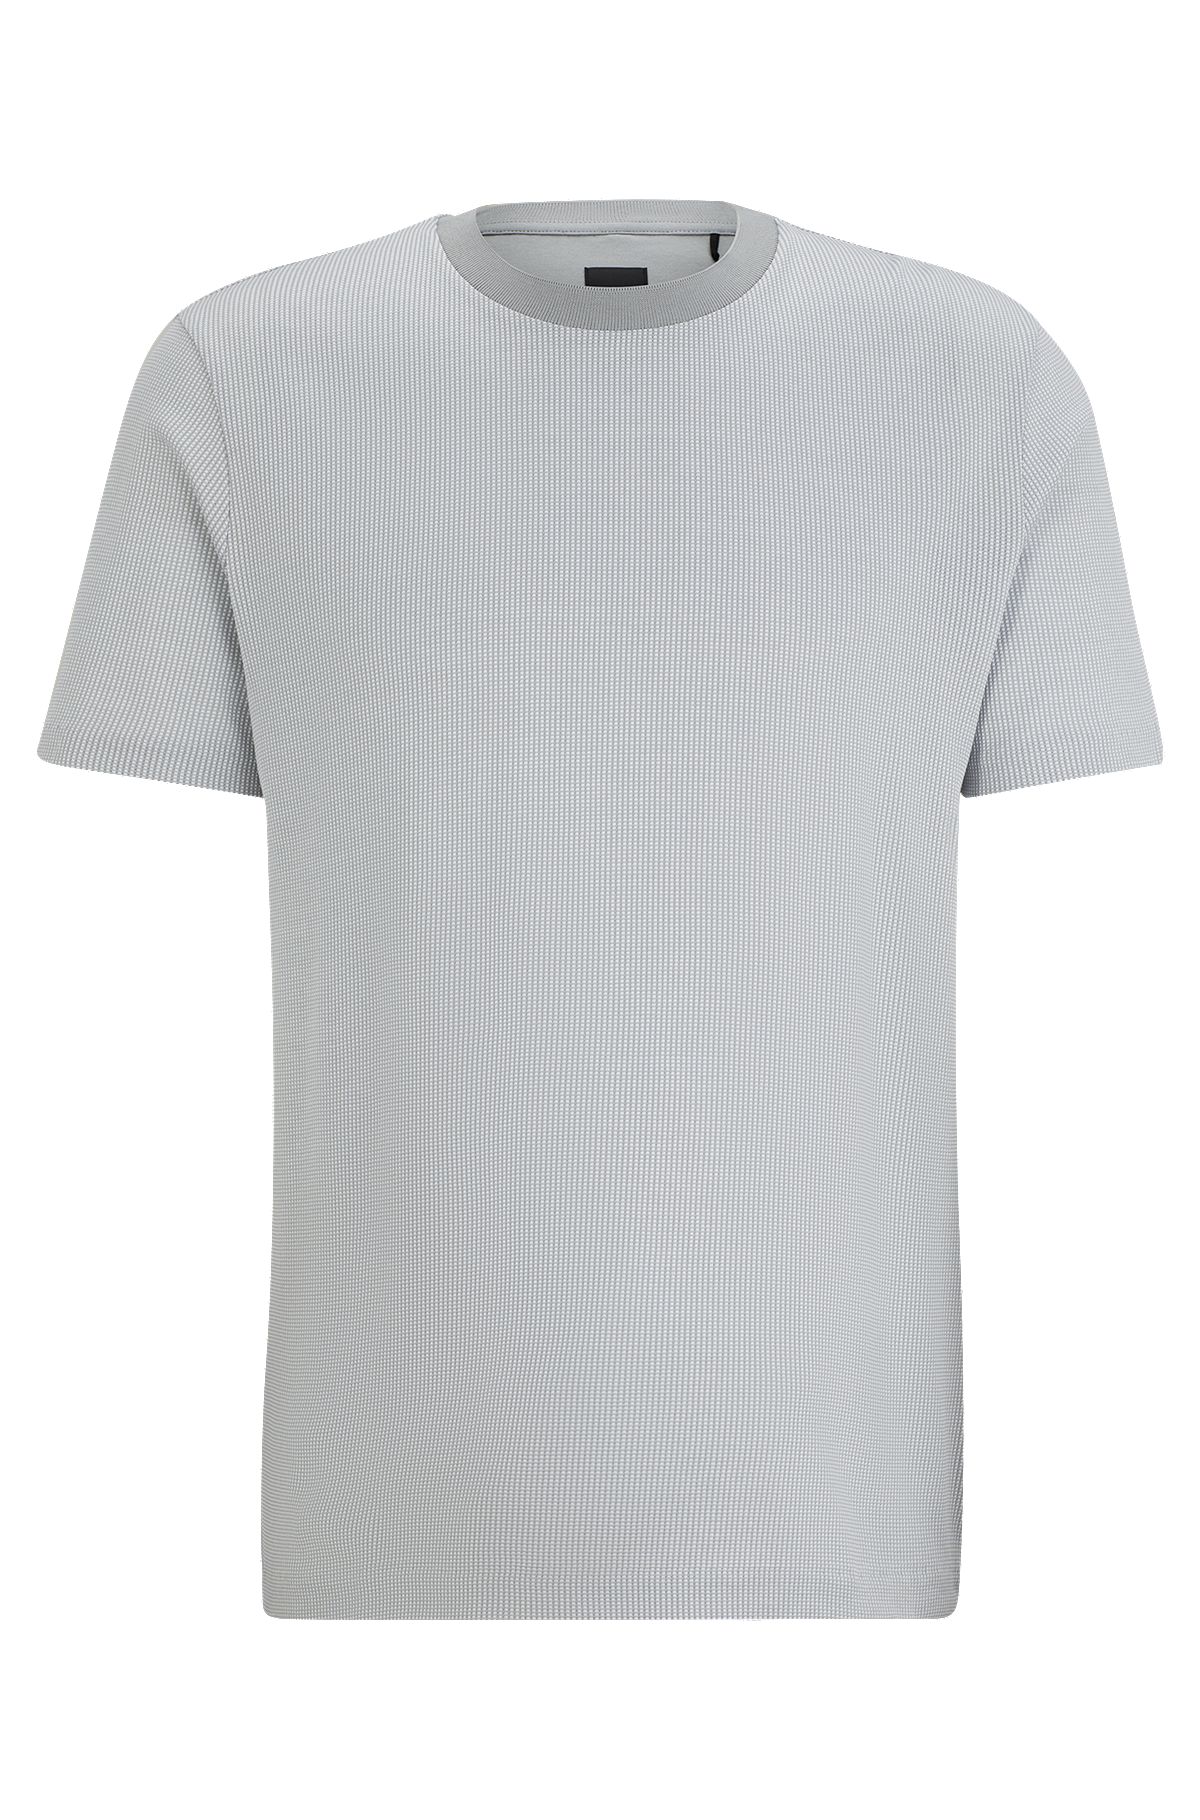 Louis Vuitton Graphic T Shirt Clearance, SAVE 55% 